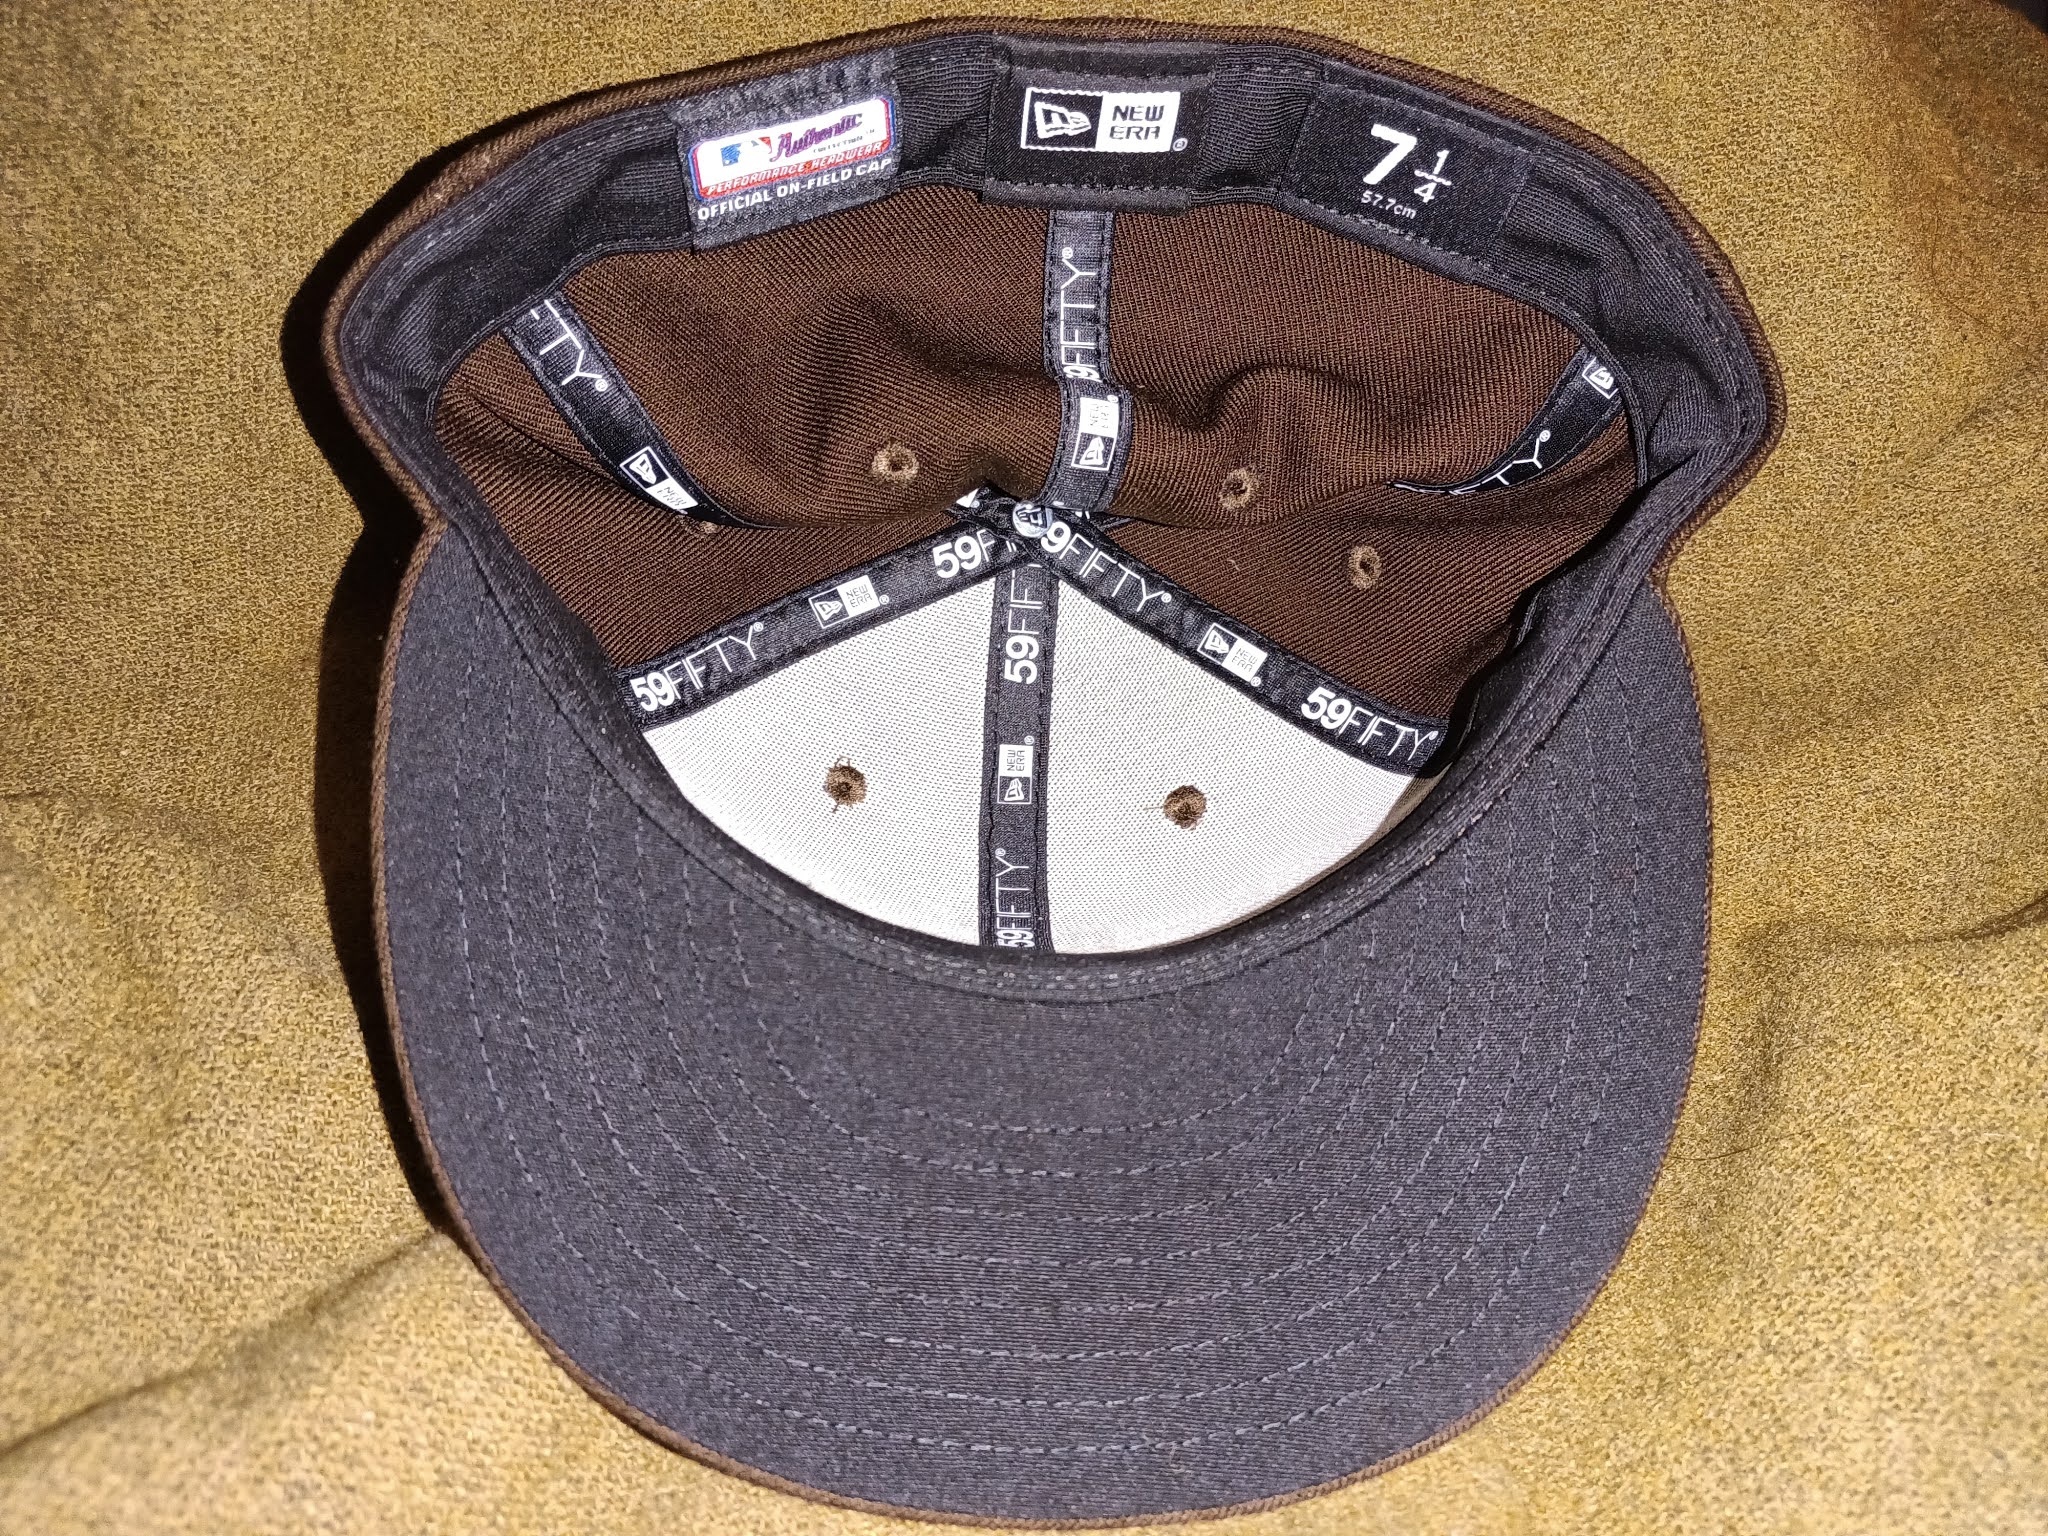 Differences Between Derby, NY-made and Miami, FL-made New Era Caps ...